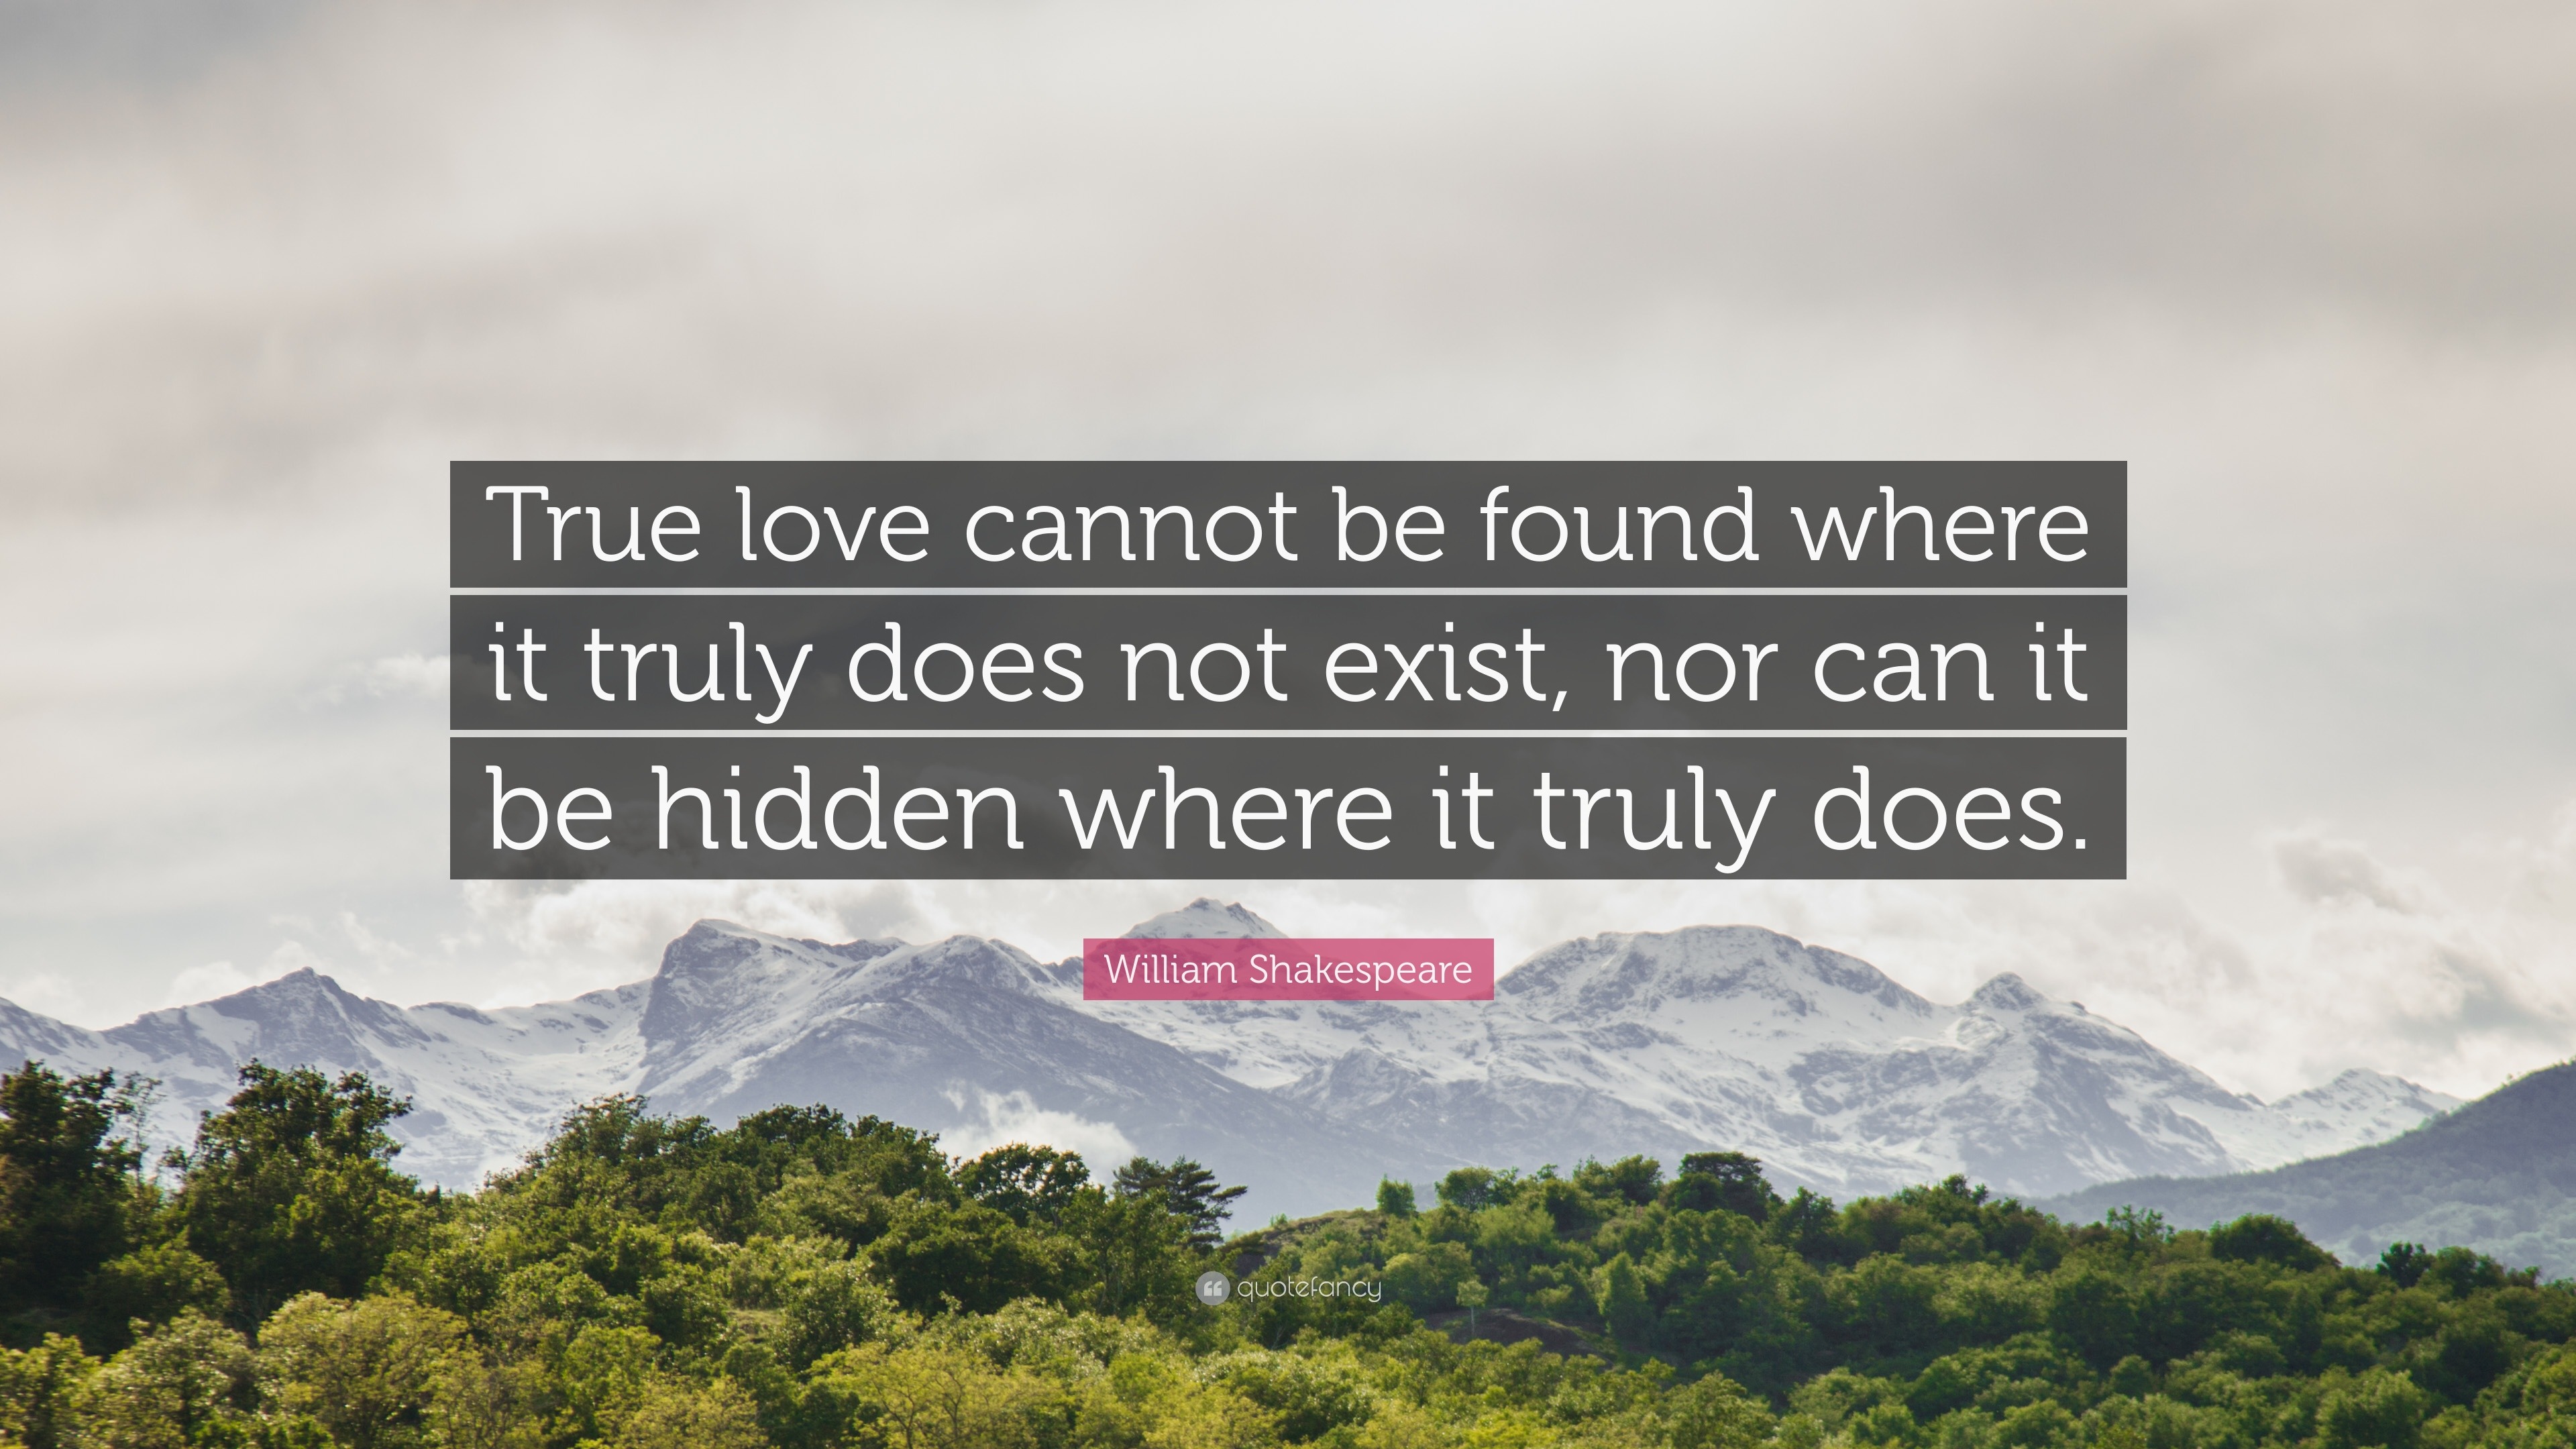 William Shakespeare Quote “True love cannot be found where it truly does not exist